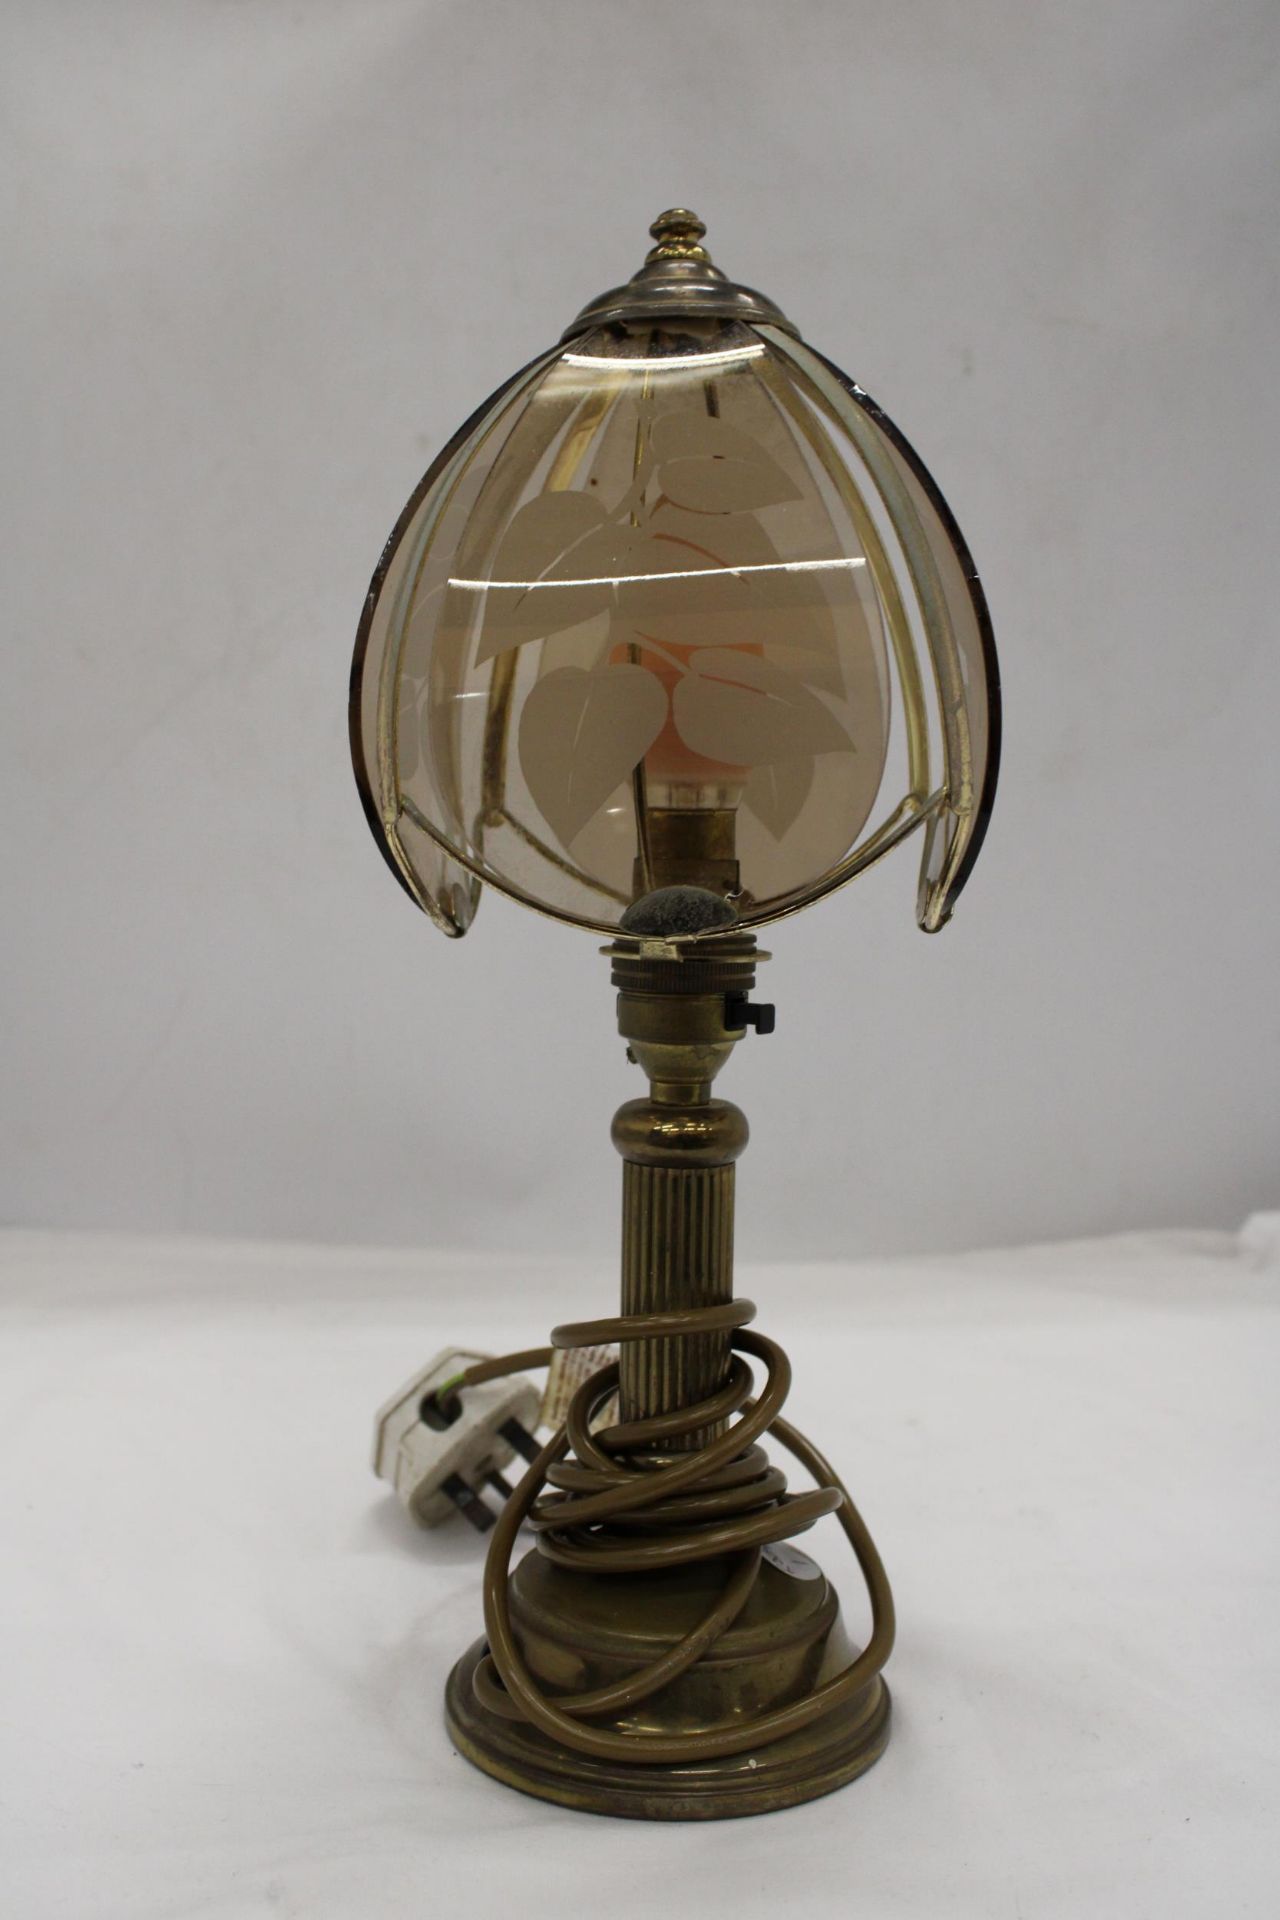 A VINTAGE STYLE, BRASS TABLE LAMP, WITH COLUMN BASE AND A GLASS SHADE, HEIGHT 36CM - Image 3 of 5